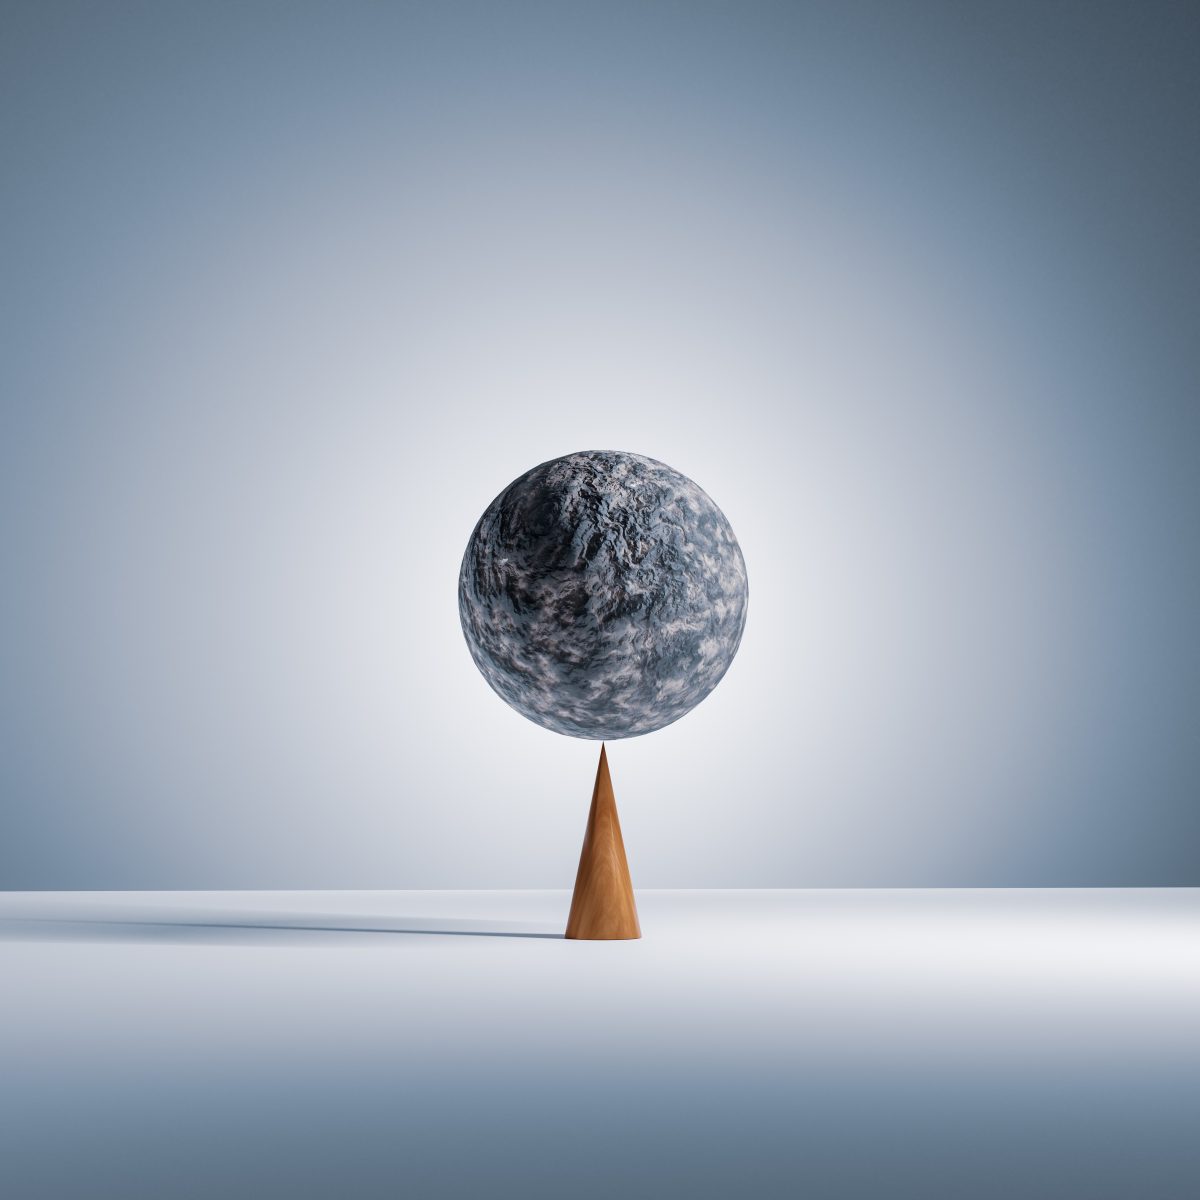 computer generated image of a stone sphere balancing perfectly on the tip of a wooden cone.